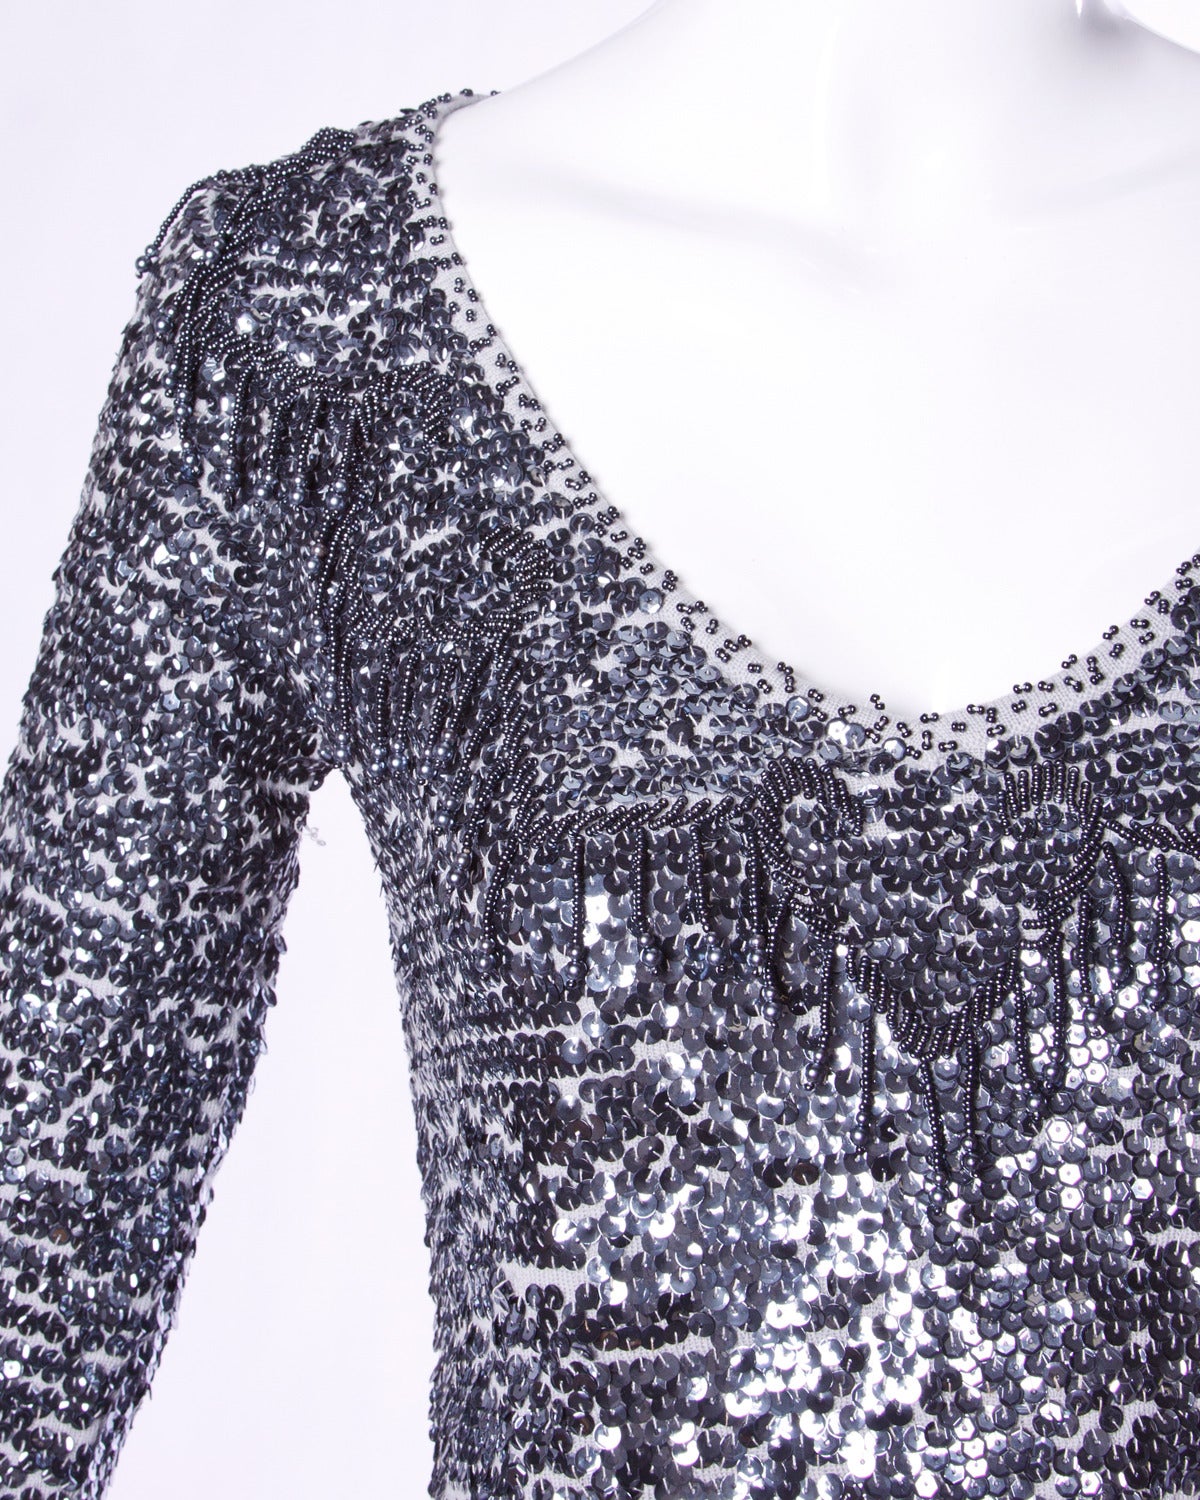 Vintage Giorgio Sant'Angelo merino wool knit sweater top with metallic gray sequin and beadwork. Long sleeves and beaded fringe.

Details:

Unlined
No Closure
Marked Size: Small
Color: Gray Metallic
Fabric: Merino Wool
Label: Giorgio